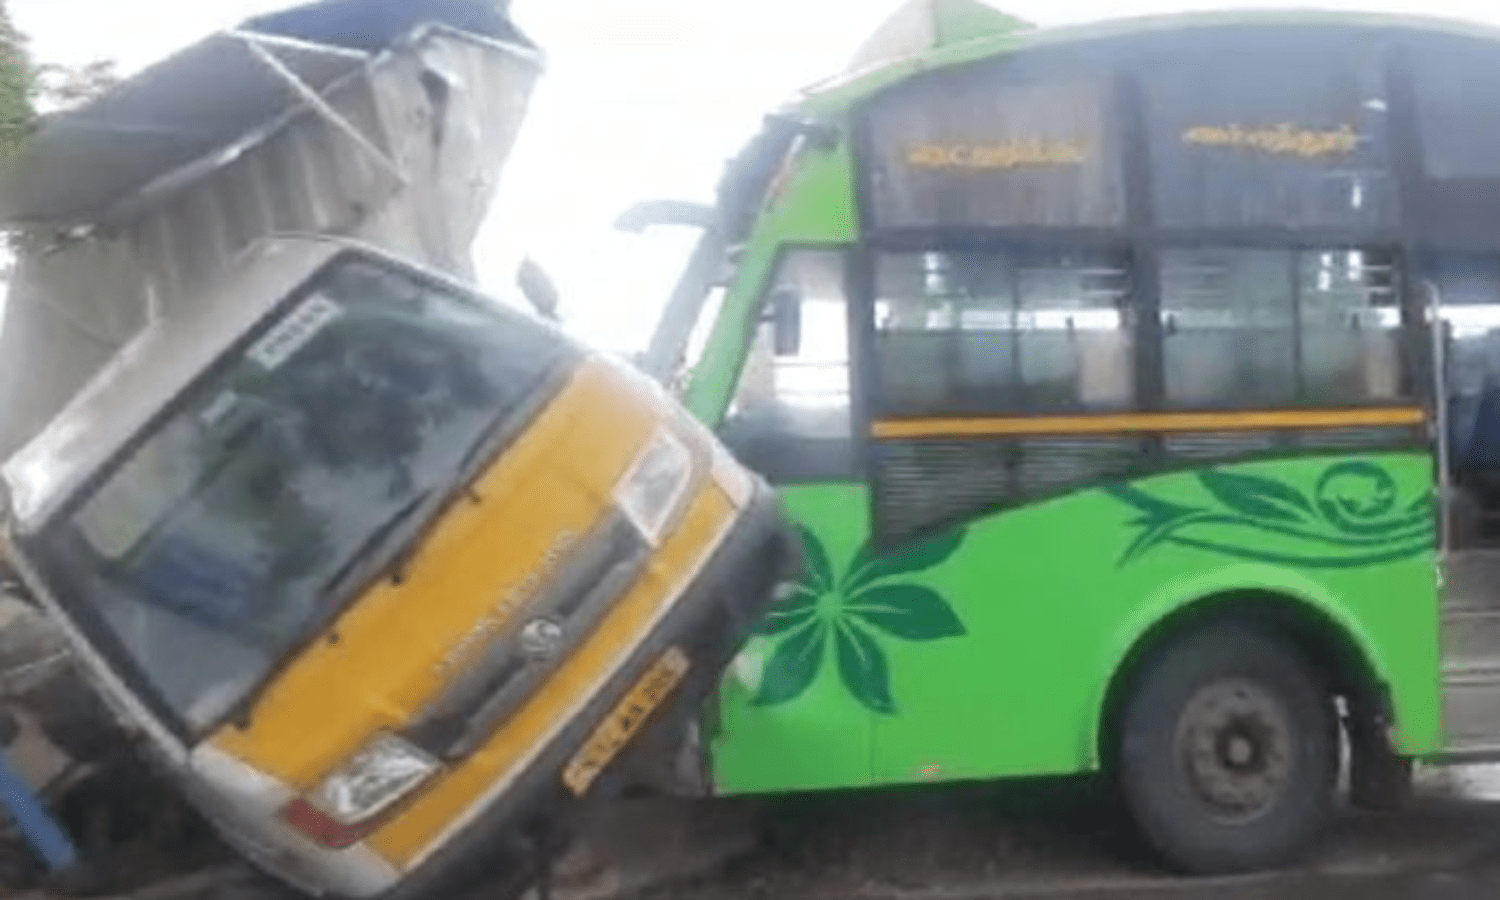 A private bus and a cargo van collide head-on in the Coimbatore district. There is a lot of excitement in the area!